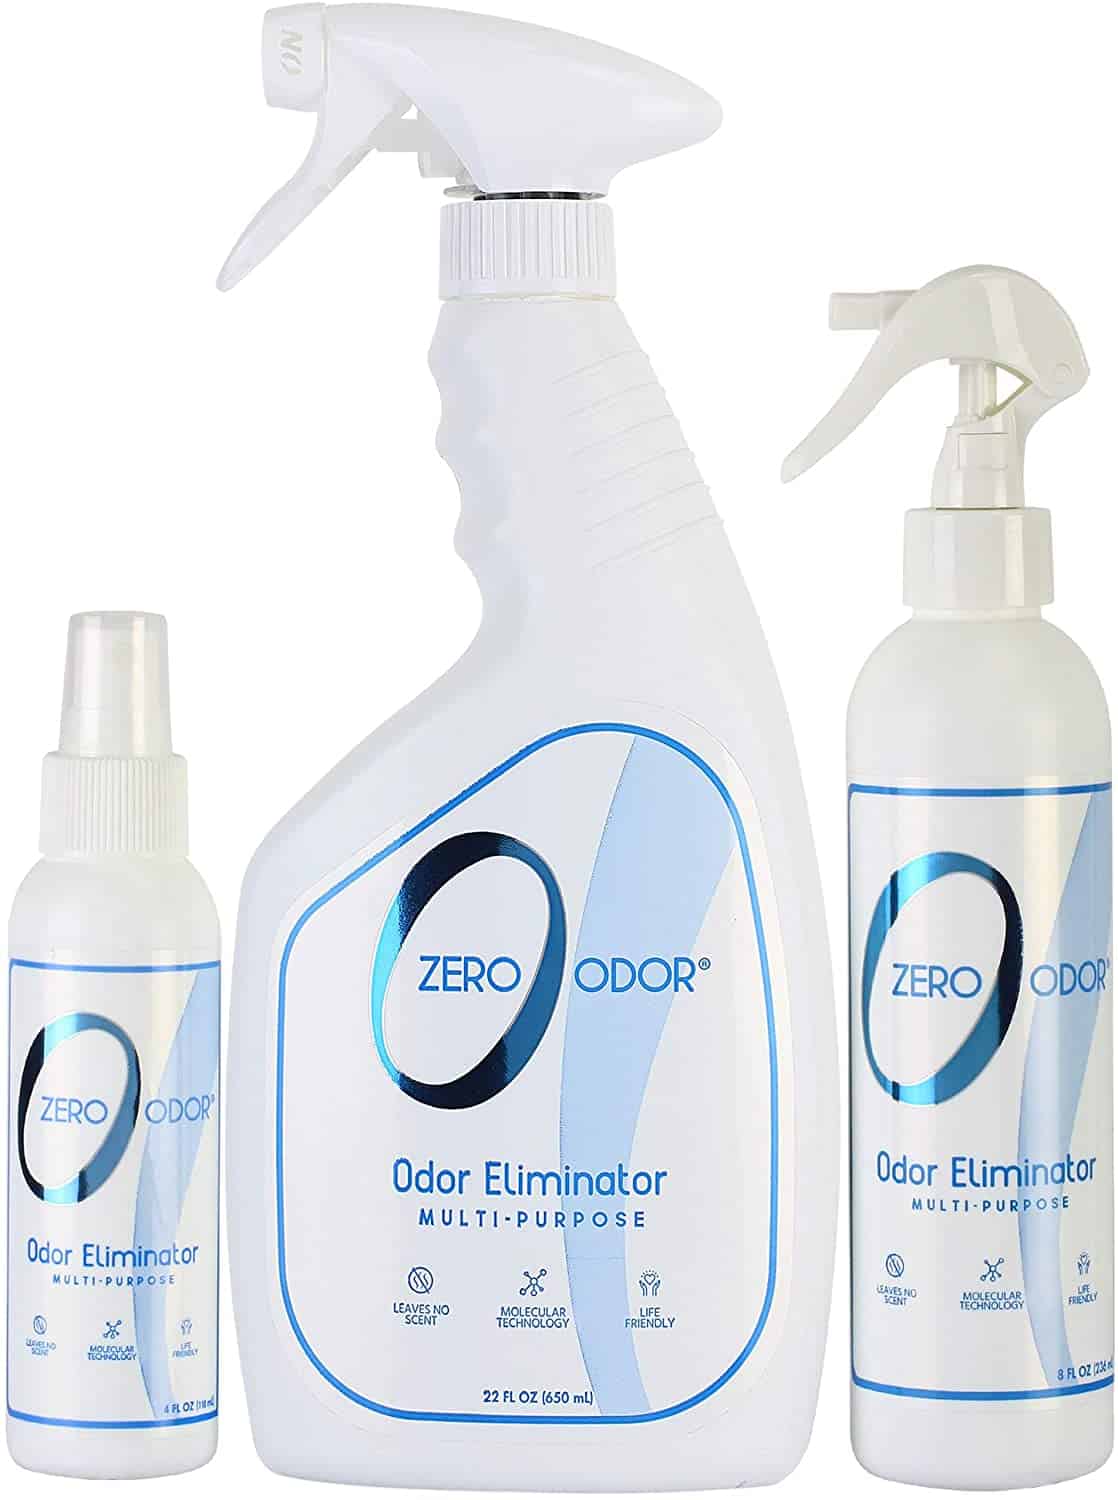 The Best Odor Eliminator for Homes THE CROWN CHOICE